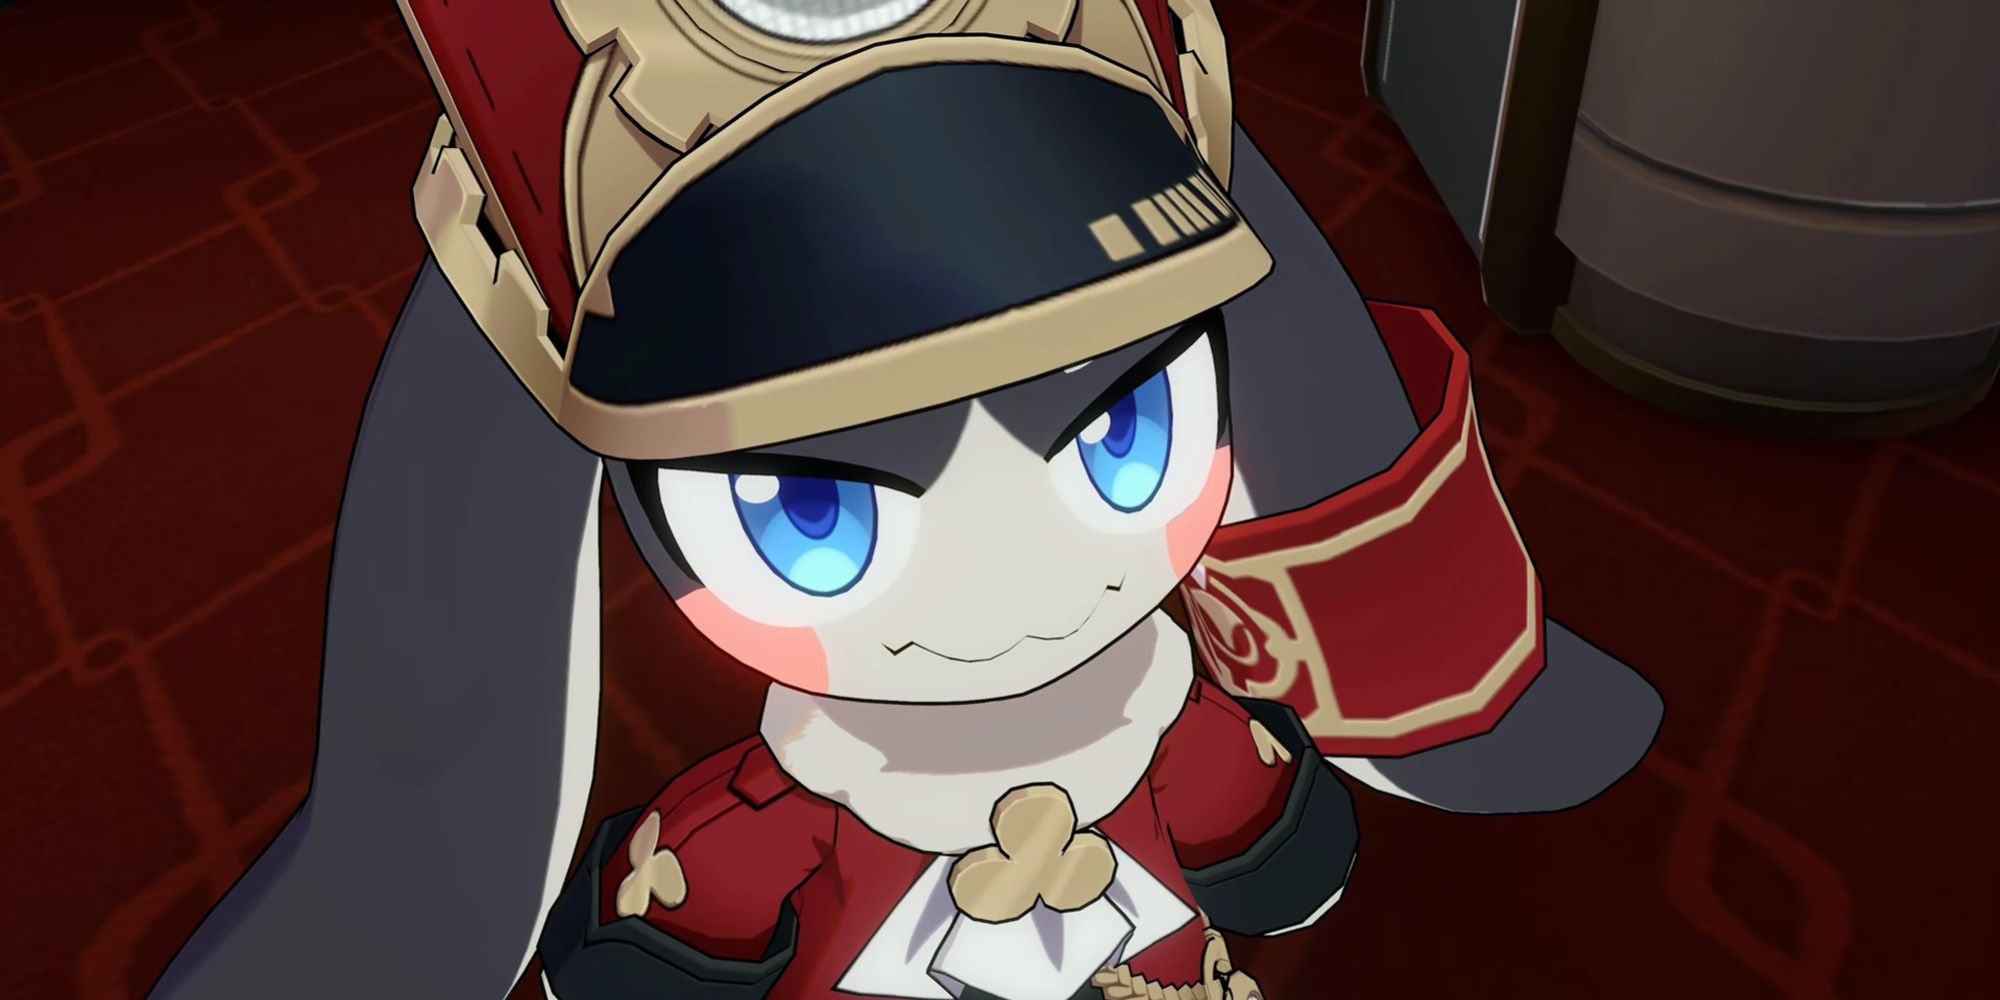 Rabbit-like character Pom-Pom, the conductor of the Astral Express in Honkai: Star Rail in an appropriate red uniform.